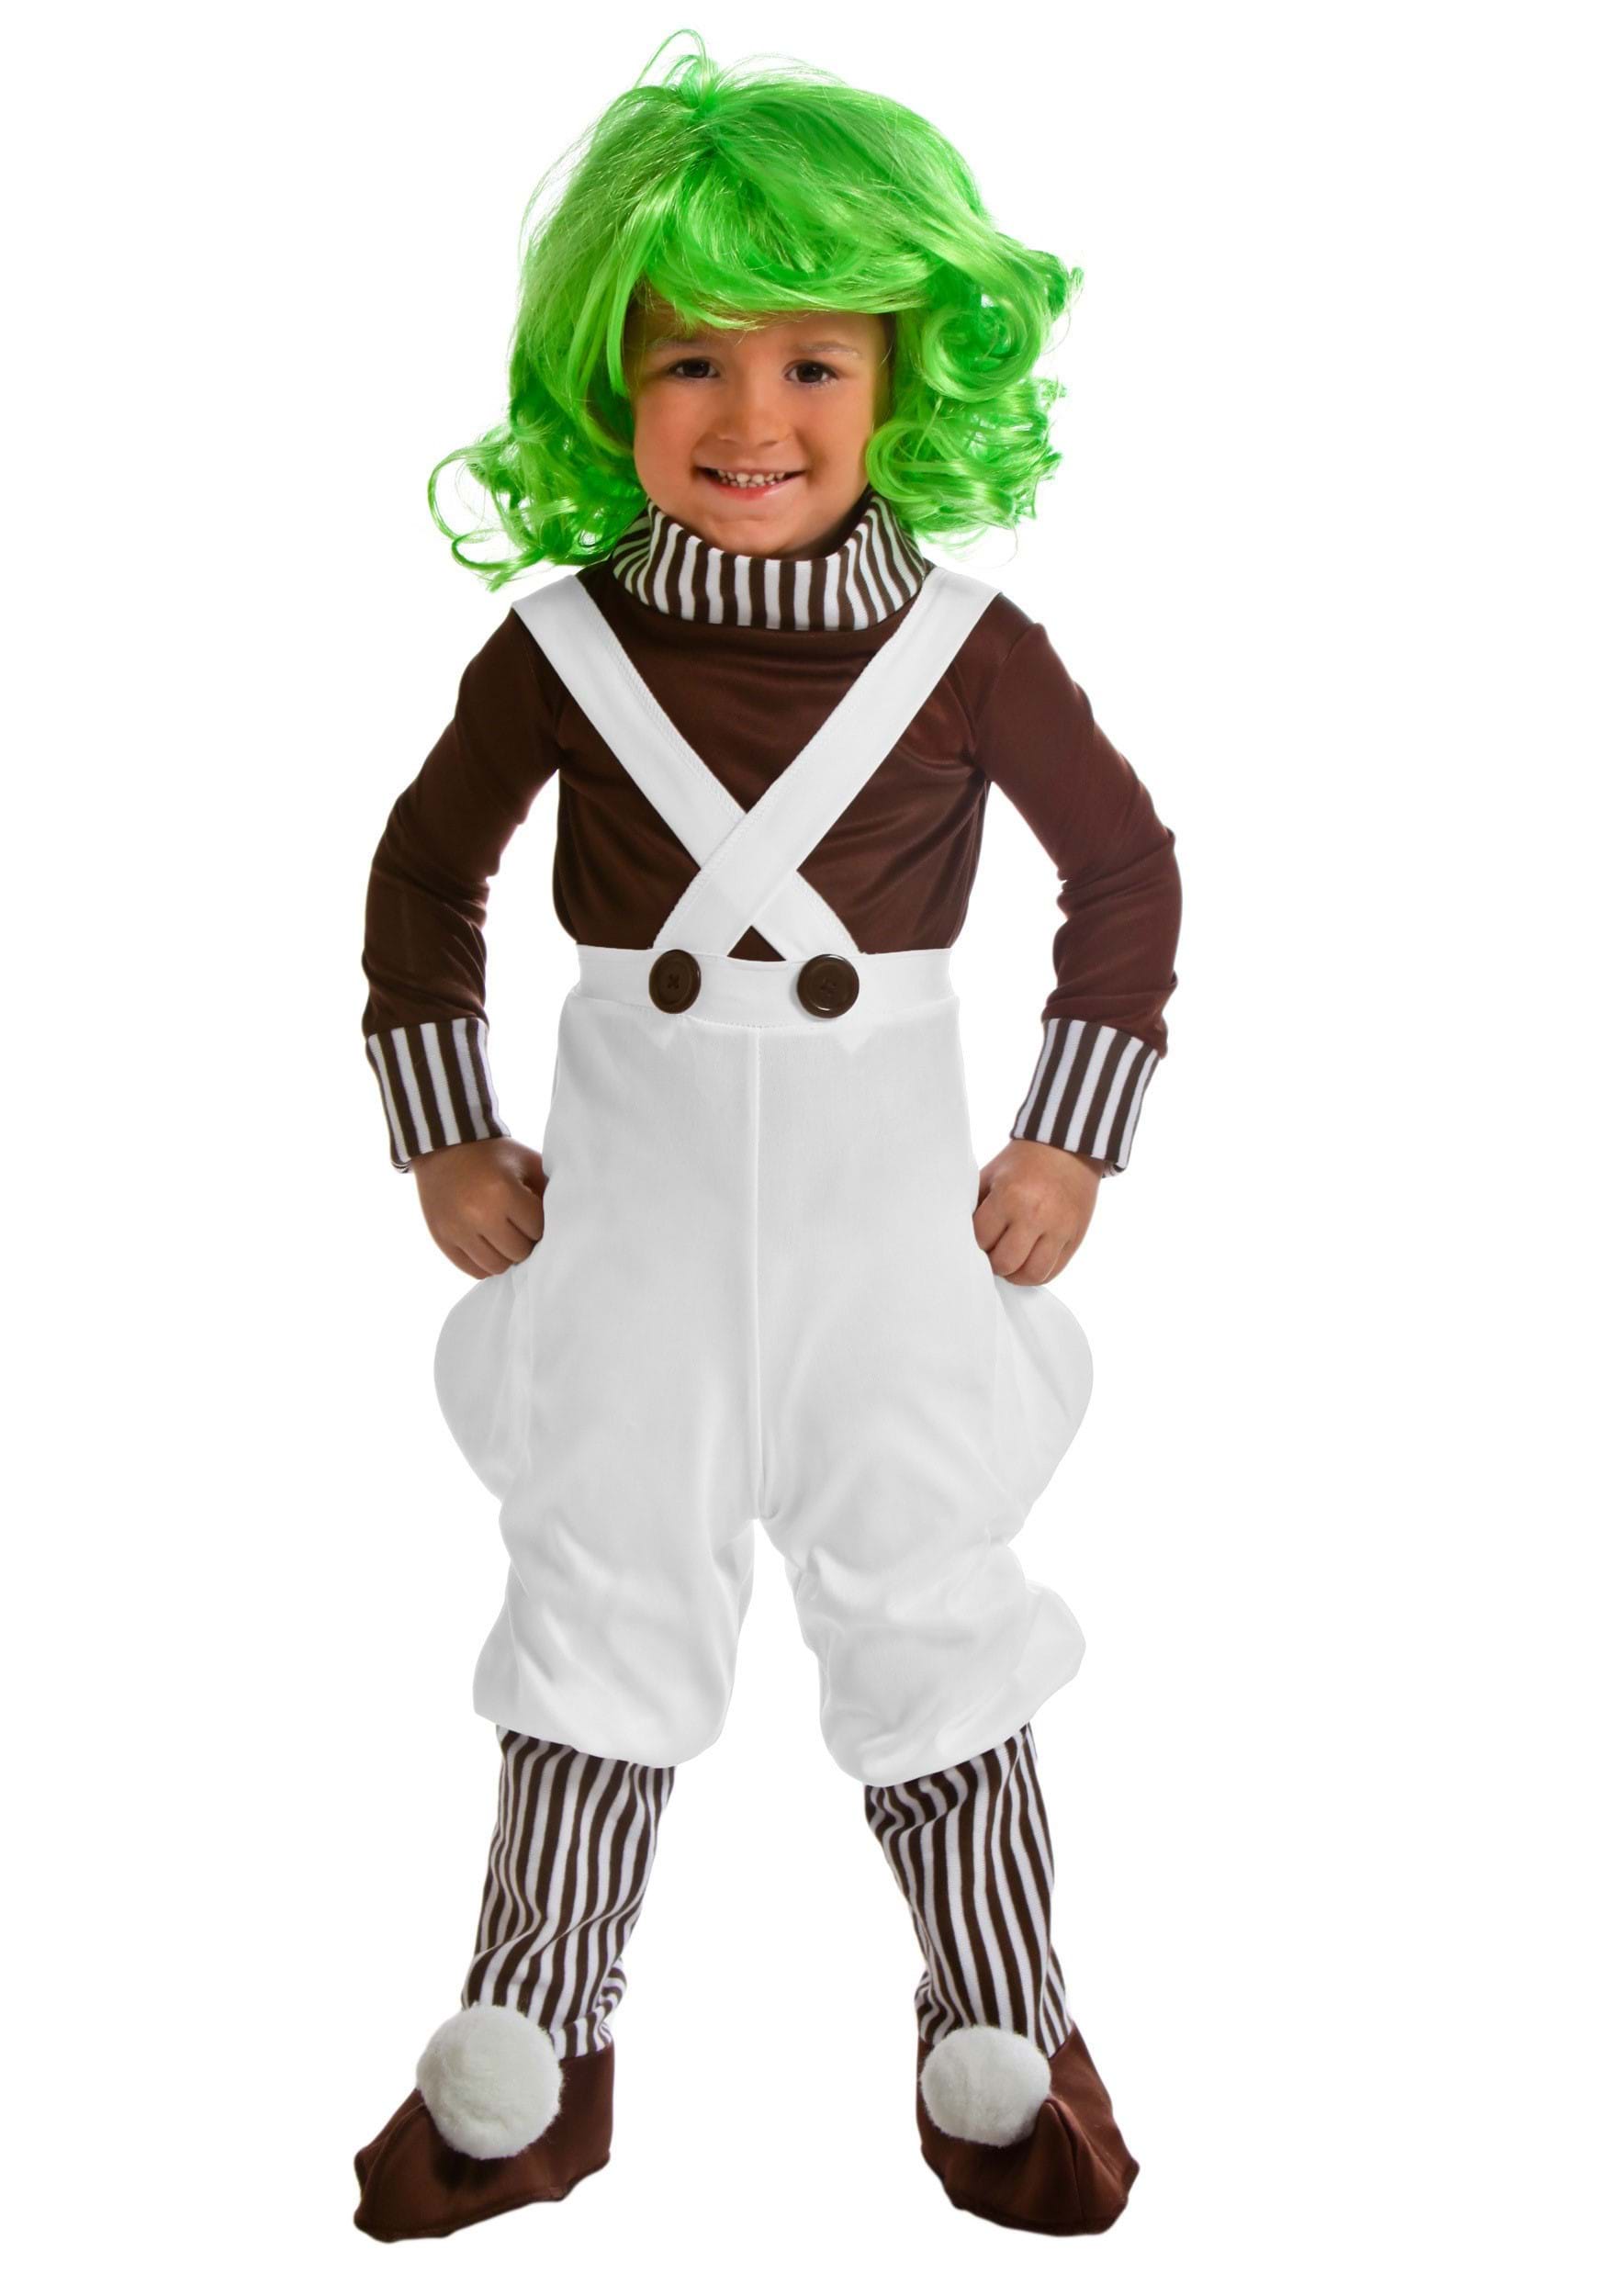 Oompa Loompa Costume for Toddlers